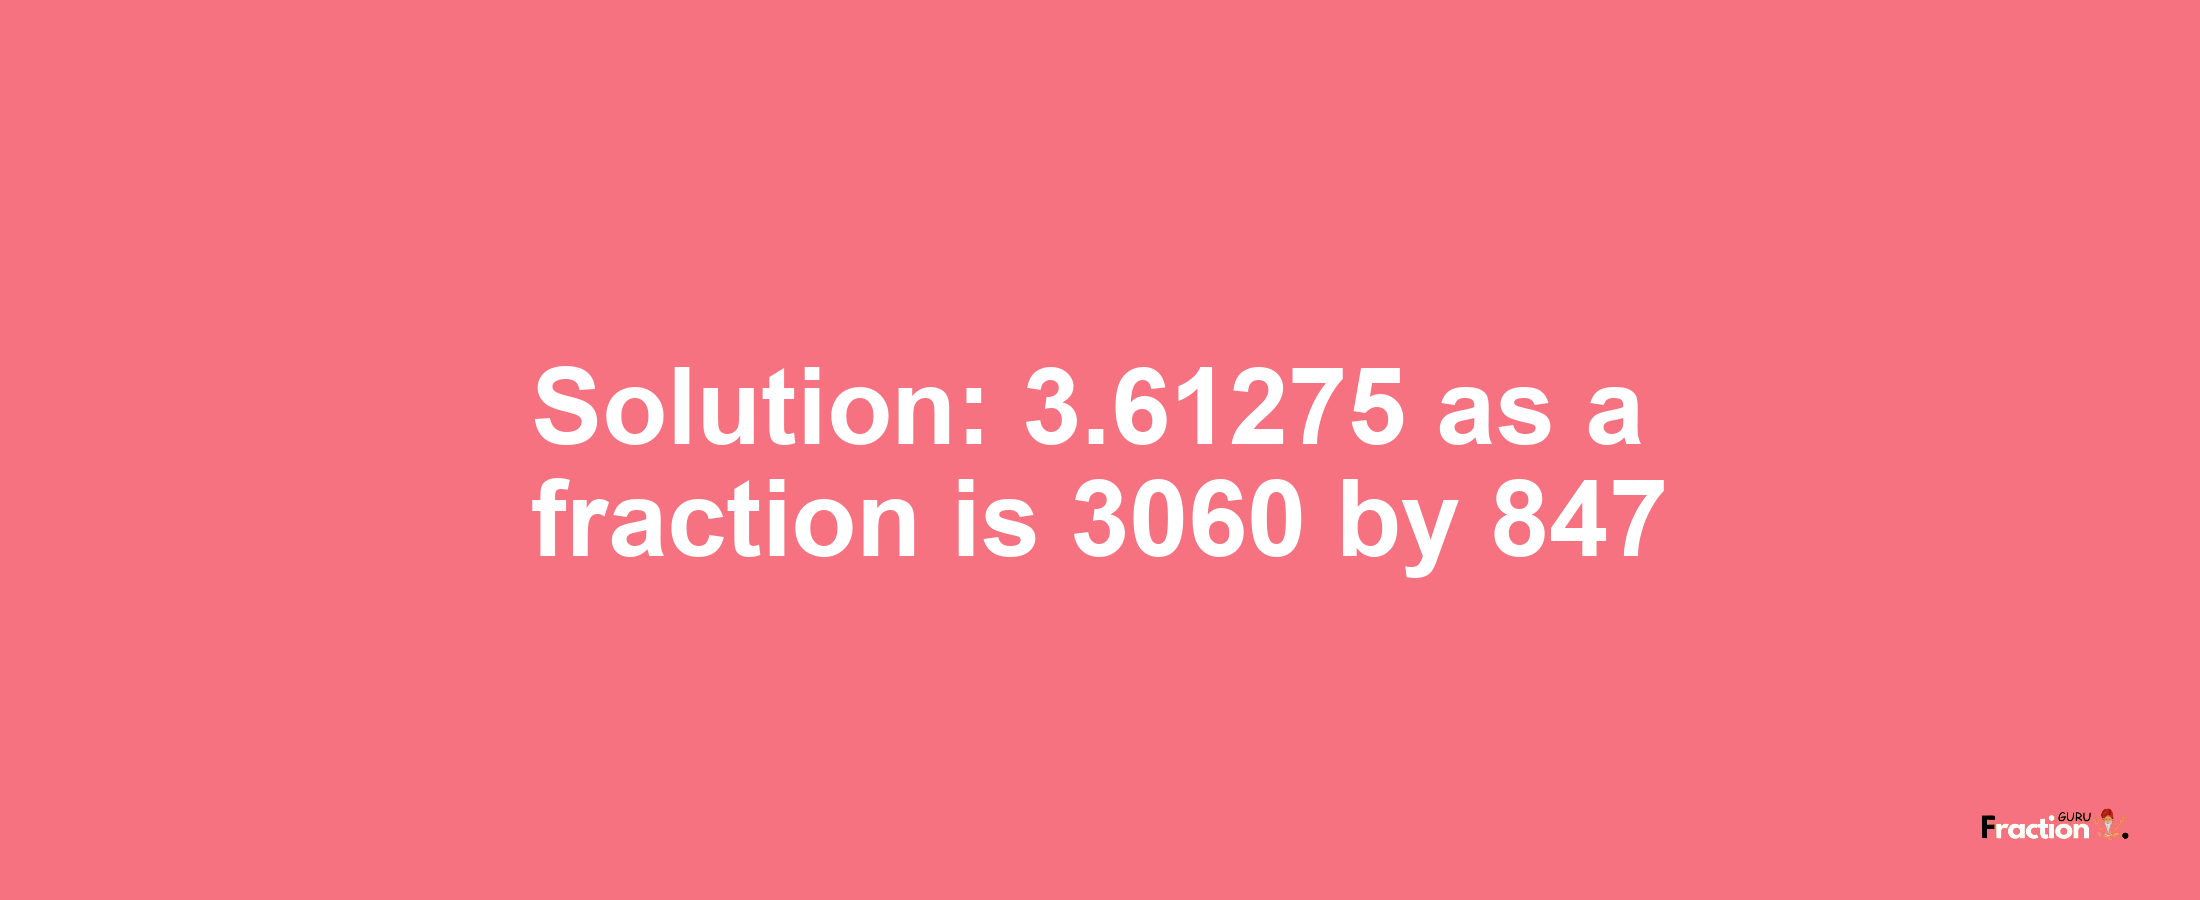 Solution:3.61275 as a fraction is 3060/847